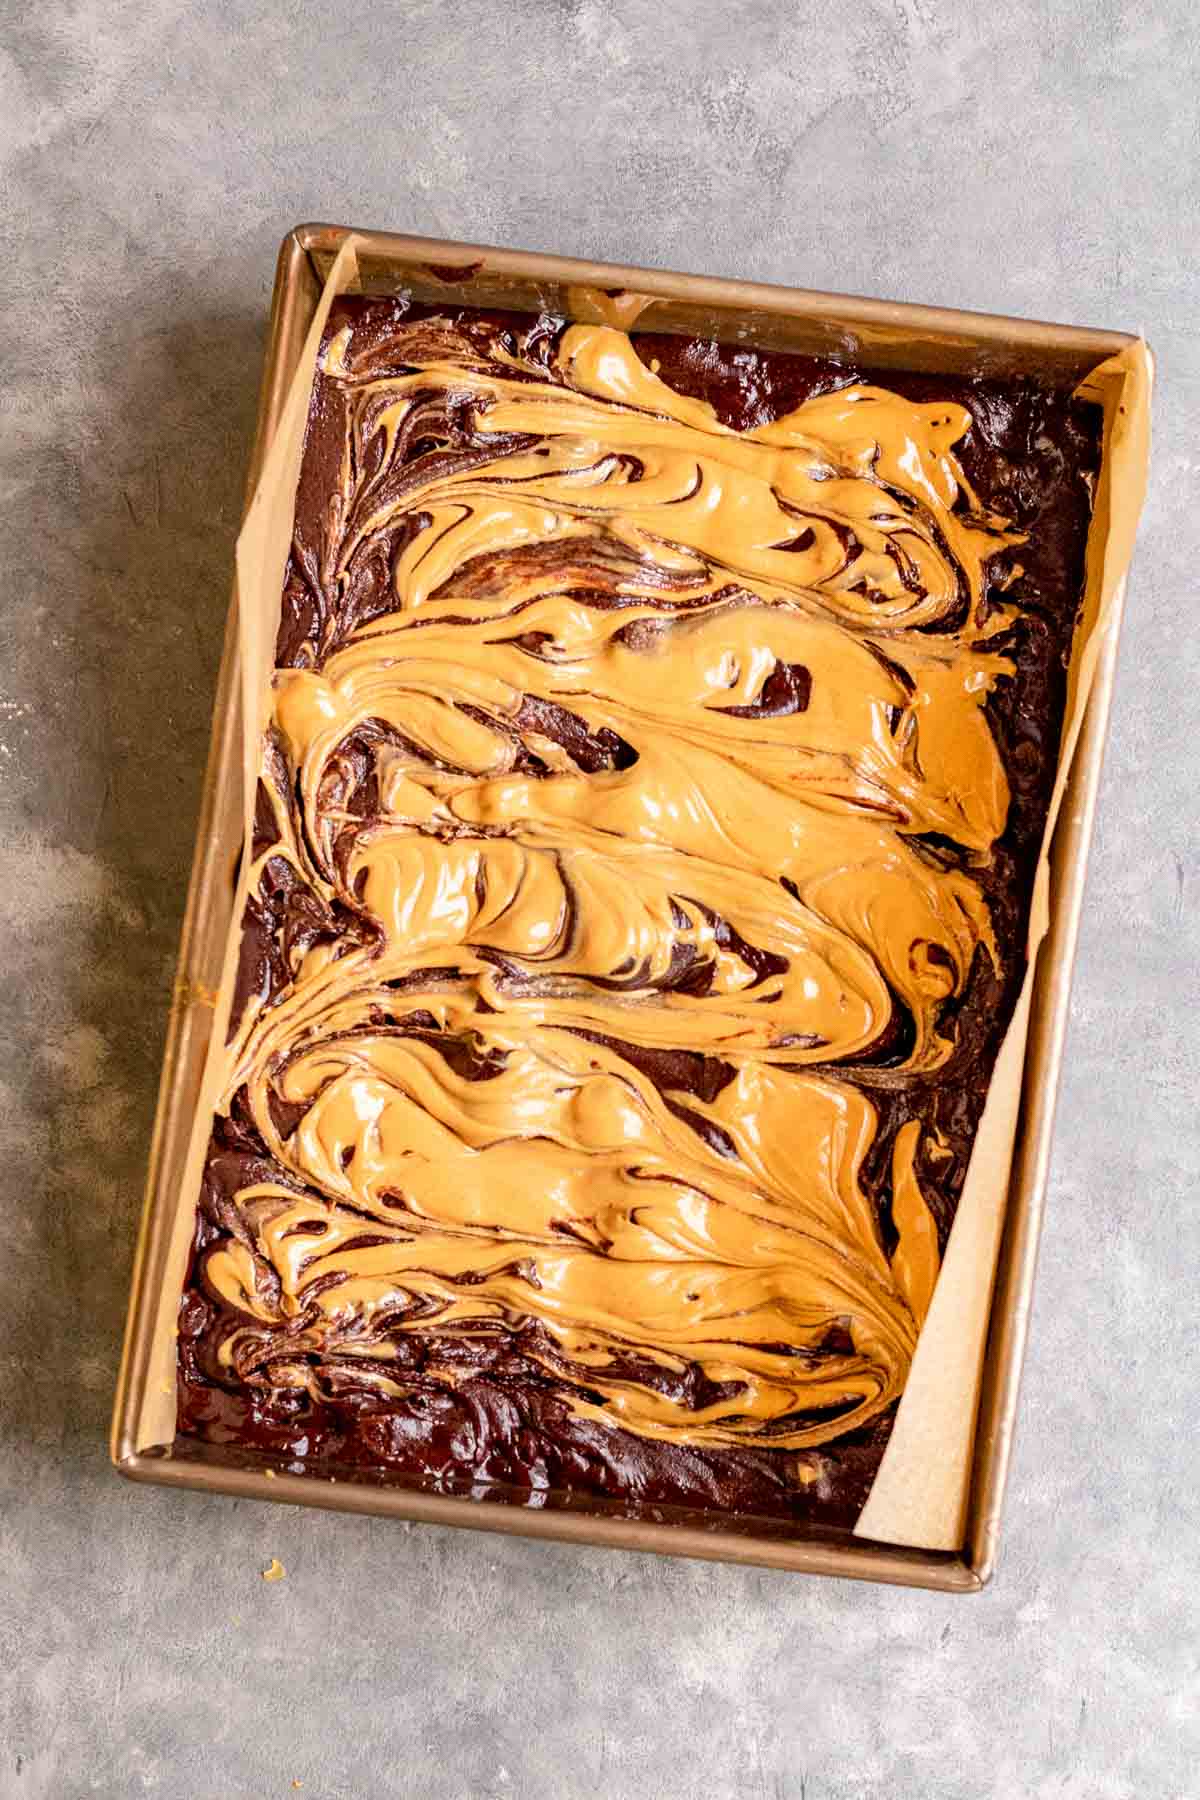 Peanut Butter Swirl Brownies batter with peanut butter before baking